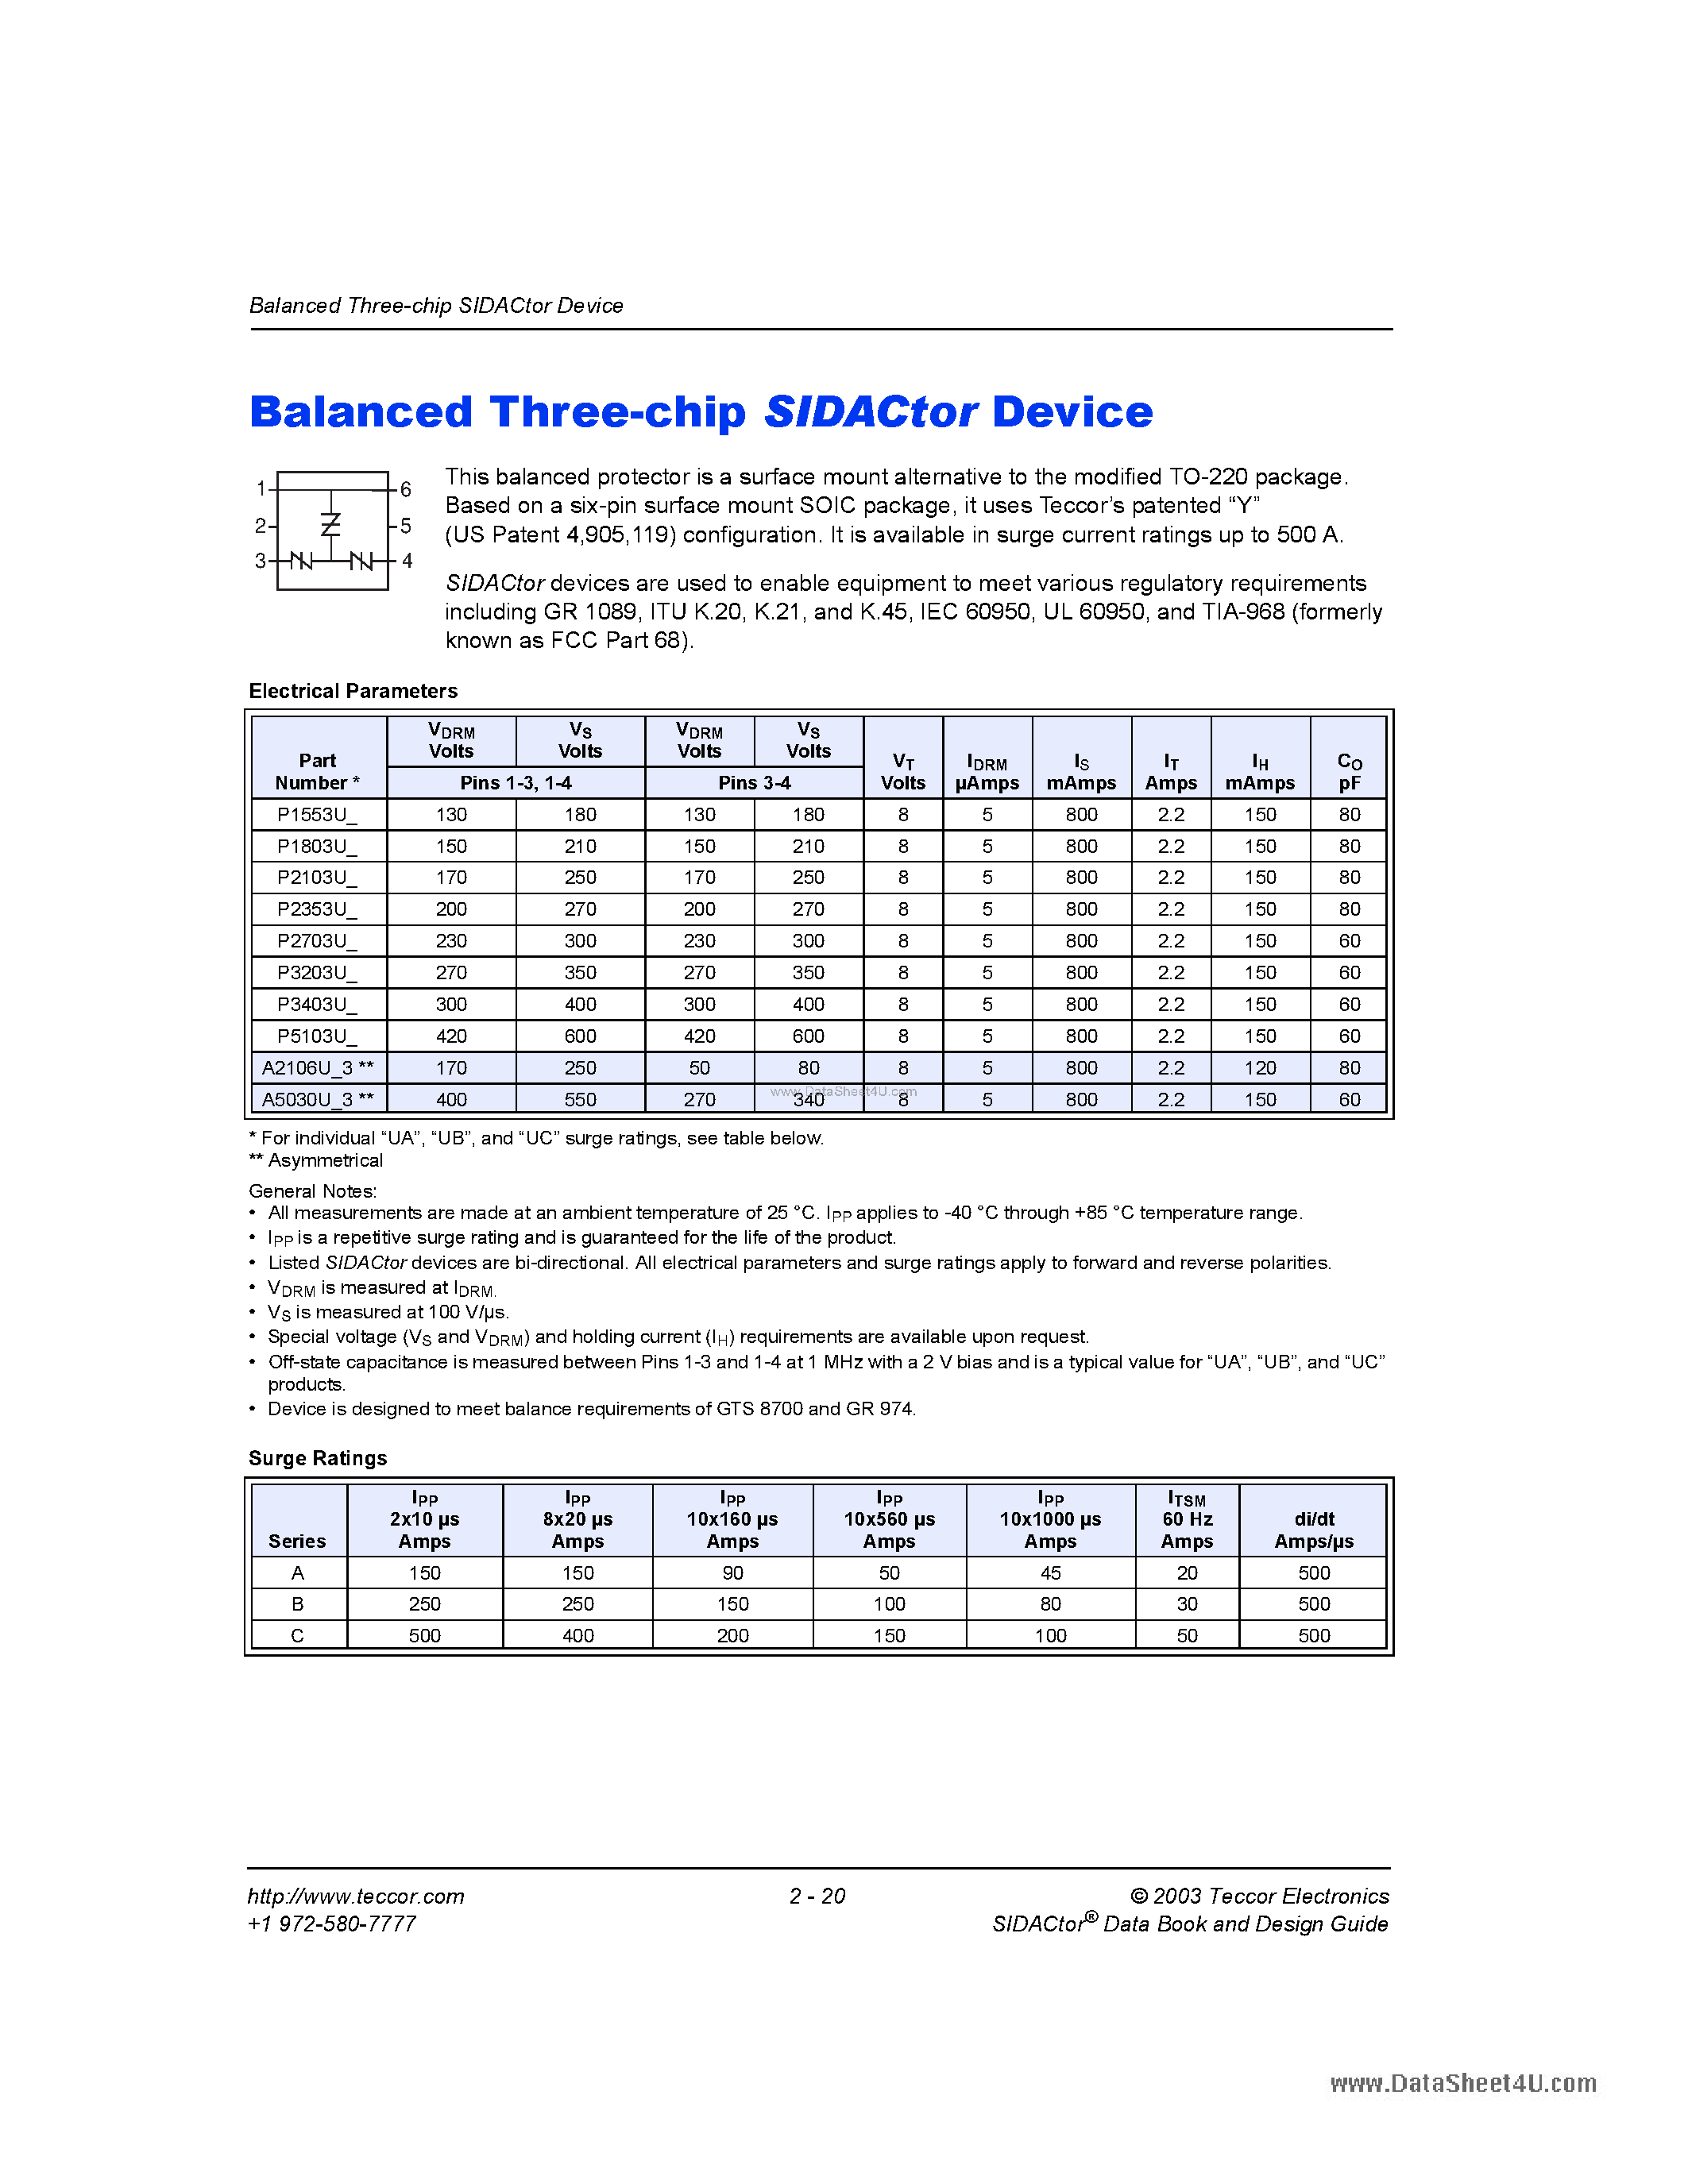 Datasheet A2106U - solid state crowbar devices page 1